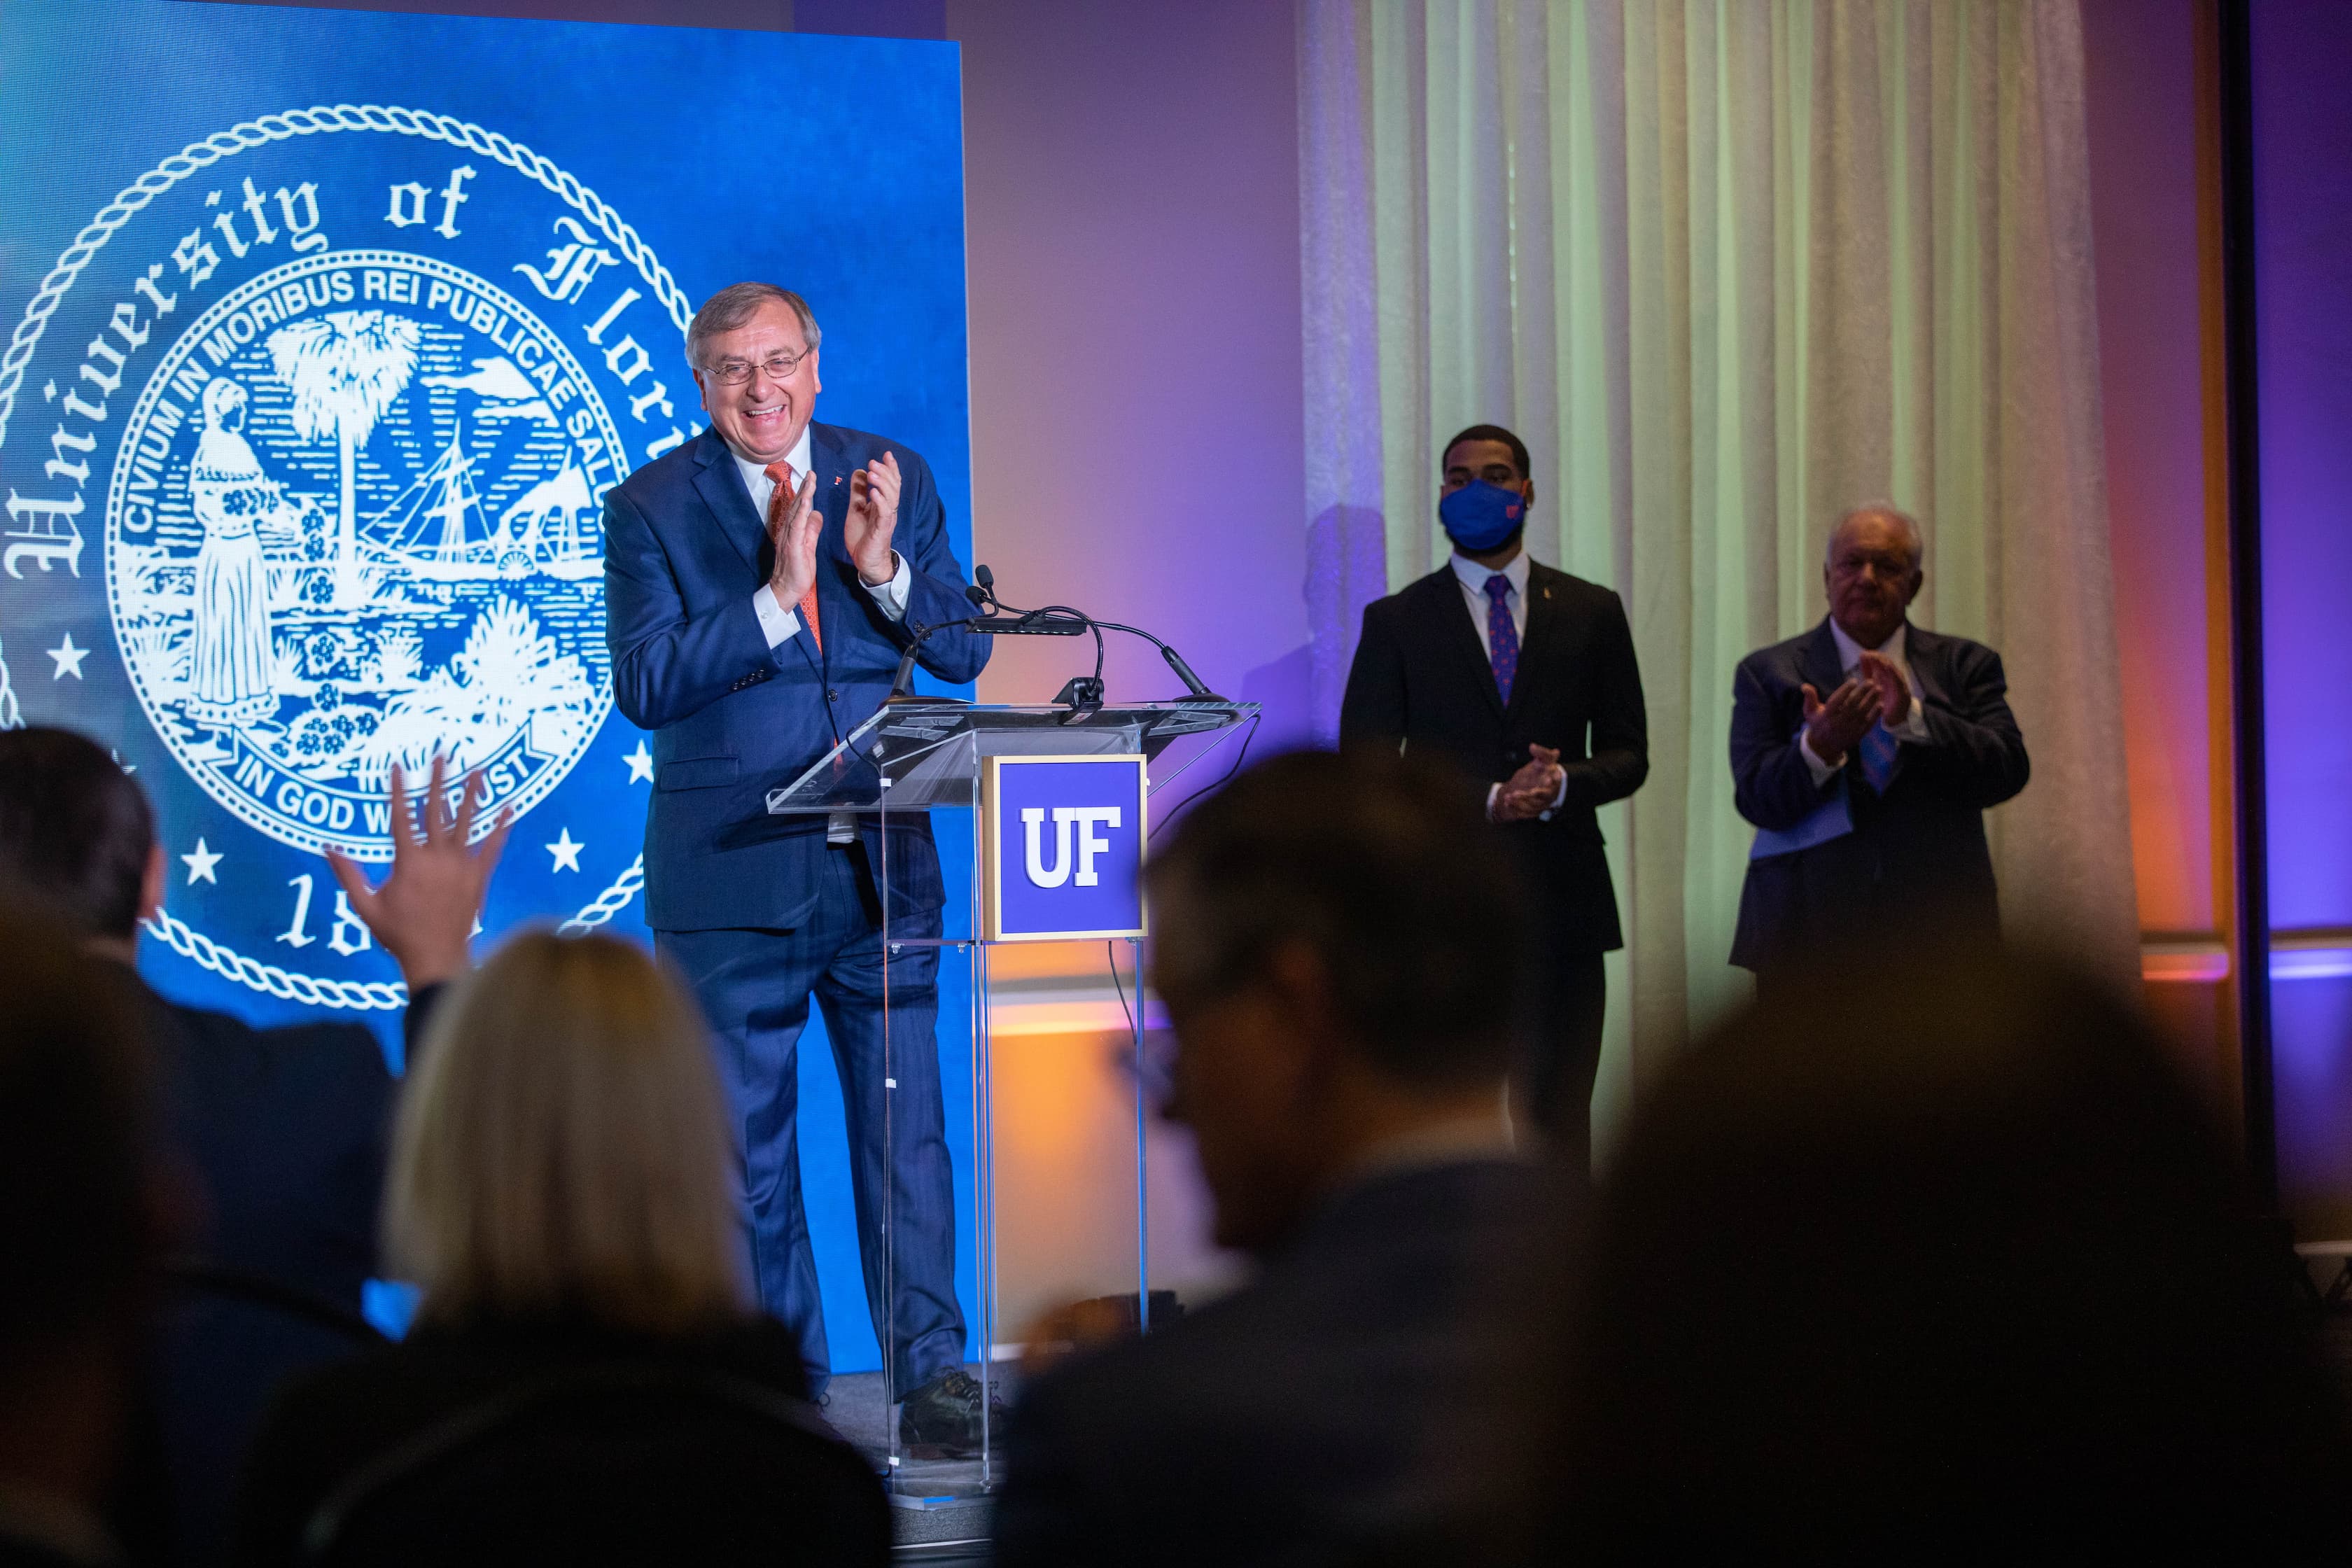 President Fuchs stands in front of a wooden lectern with the blue-and-white UF logo on the front of it. He is clapping and flanked by two members of the UF Board of Trustees.